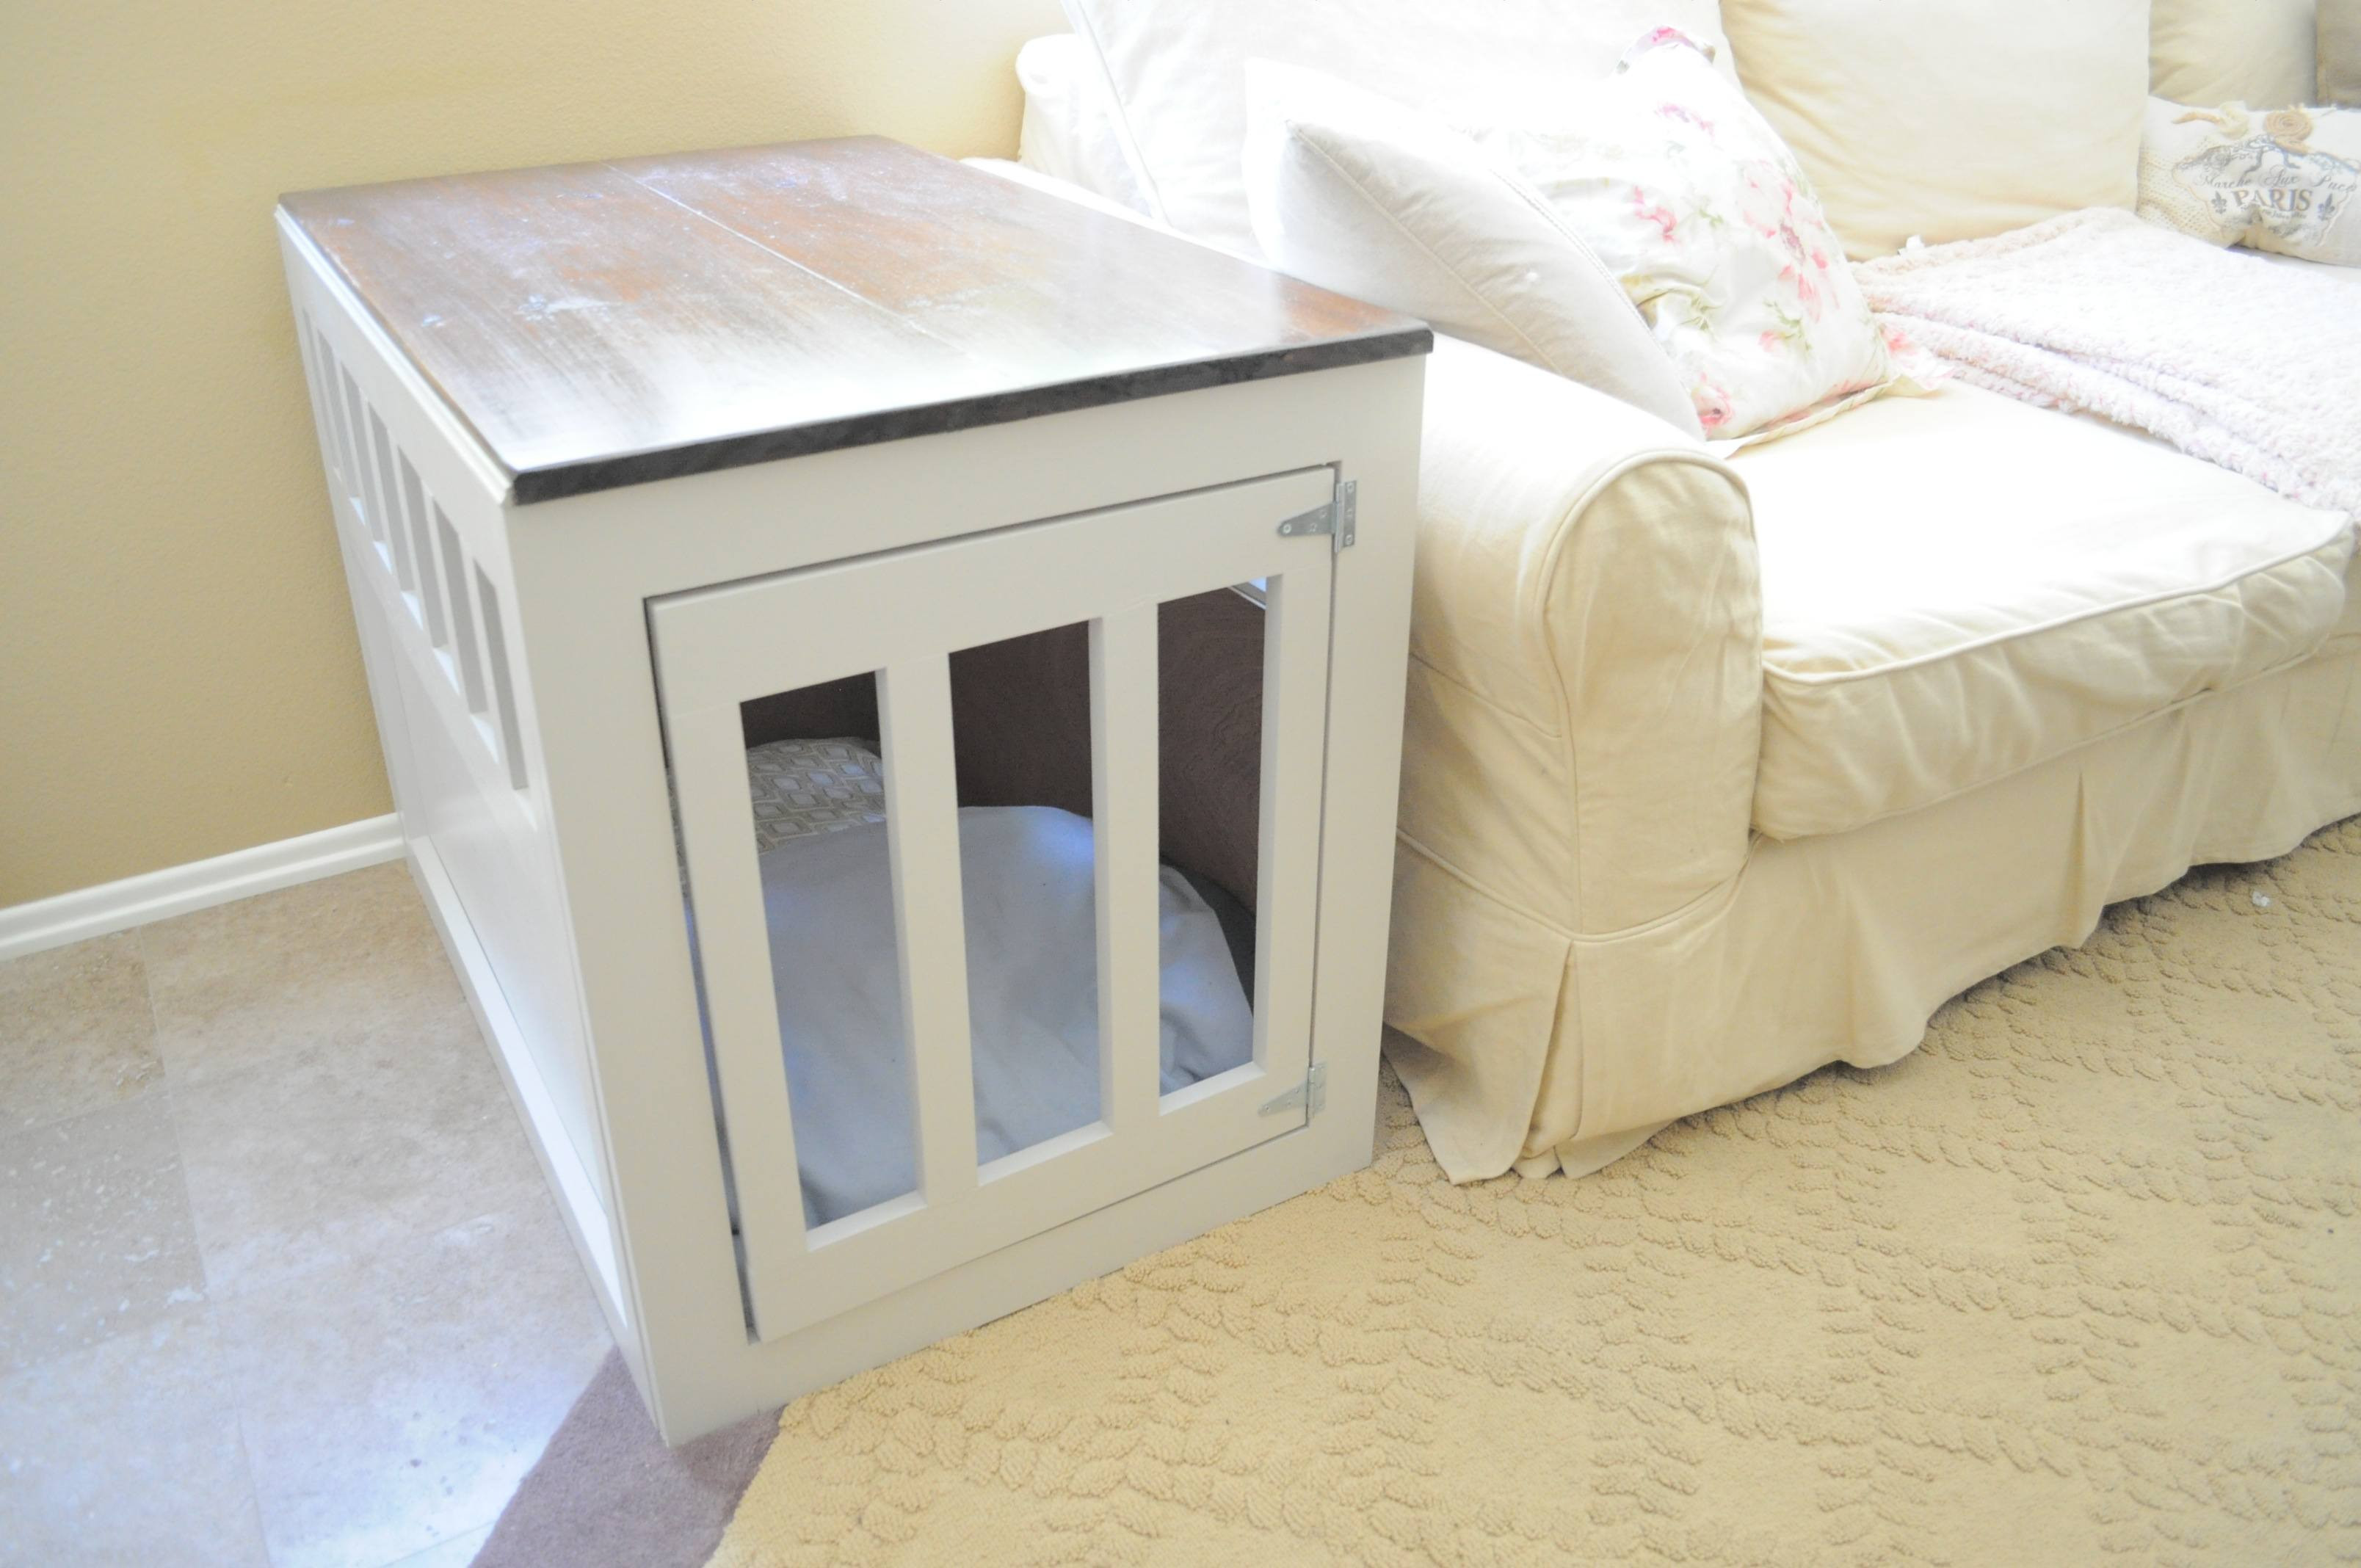 Dog Crate Furniture DIY
 Every Dog Owner Should Learn These 20 DIY Pet Projects